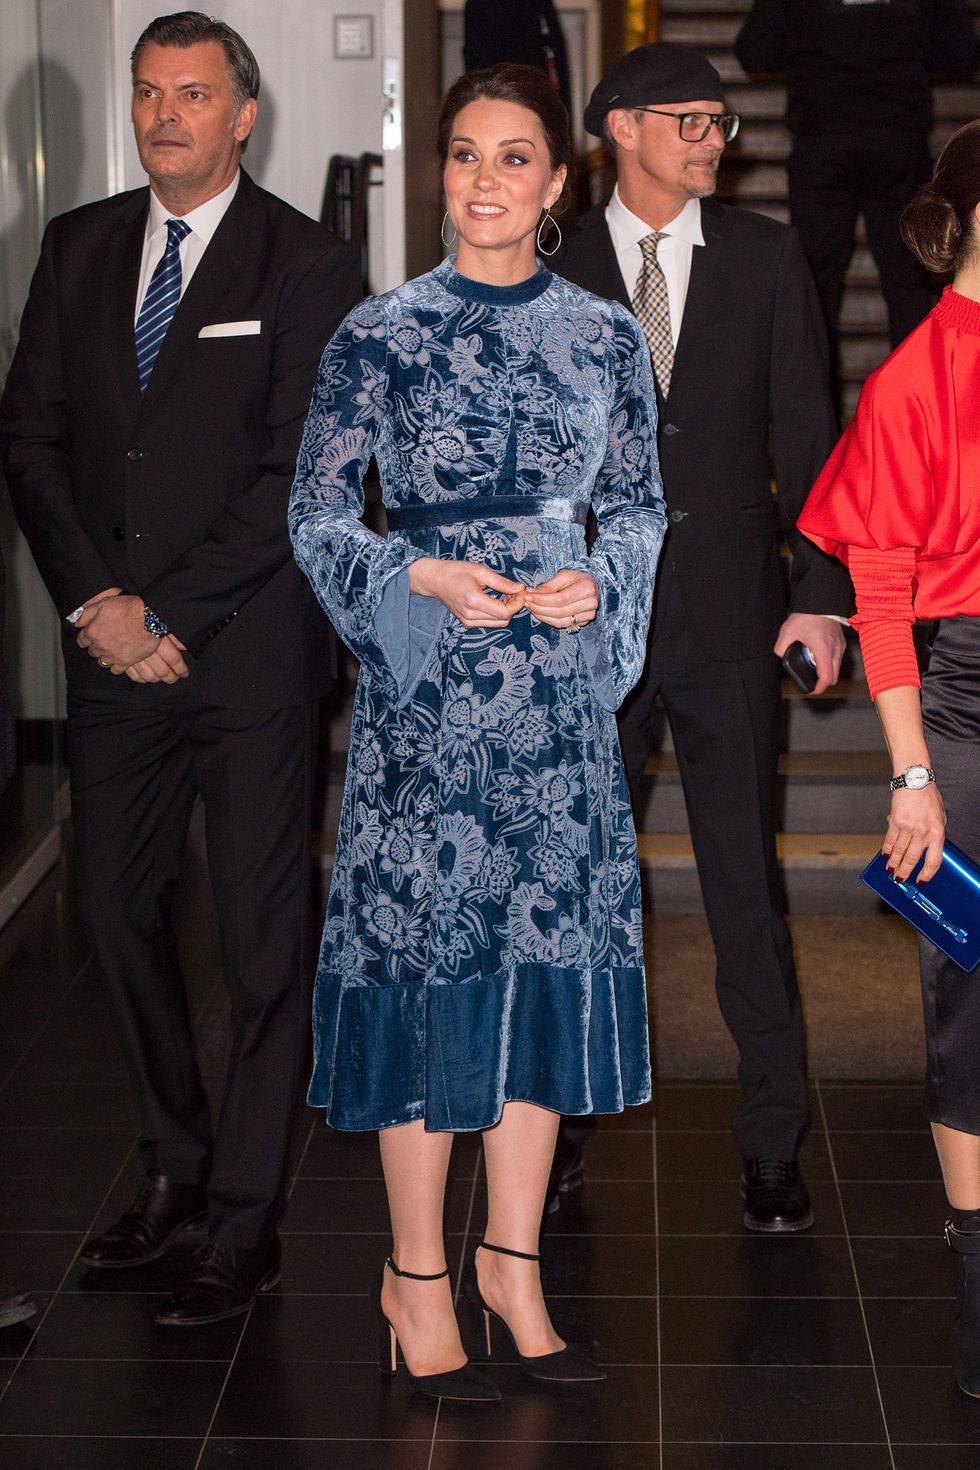 35-attends-a-reception-at-the-fotografiska-galleries-in-stockholm-on-day-2-of-the-duke-and-duchess-of-cambridge-s-visit-to-sweden-1523224526.jpg